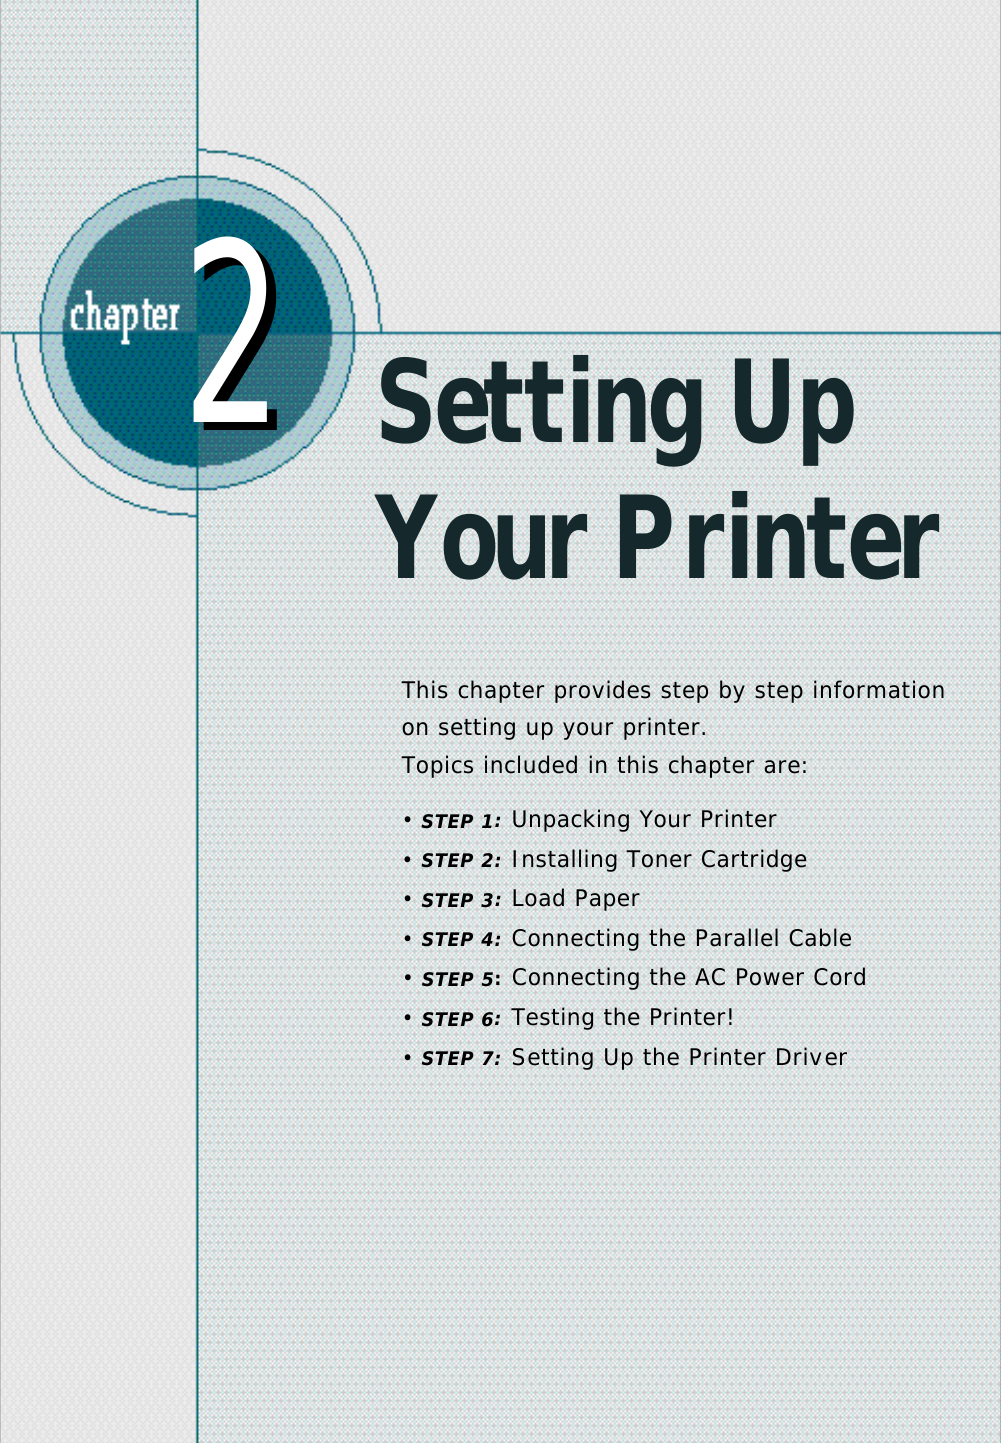 Setting Up    Your PrinterThis chapter provides step by step informationon setting up your printer.Topics included in this chapter are:• S T E P 1 :Unpacking Your Printer• S T E P 2 :Installing Toner Cartridge• S T E P 3 :Load Pa p e r• S T E P 4 :Connecting the Pa r allel Cable• S T E P 5:Connecting the AC Power Cord• S T E P 6:Testing the Printer!• S T E P 7:Setting Up the Printer Drive r22